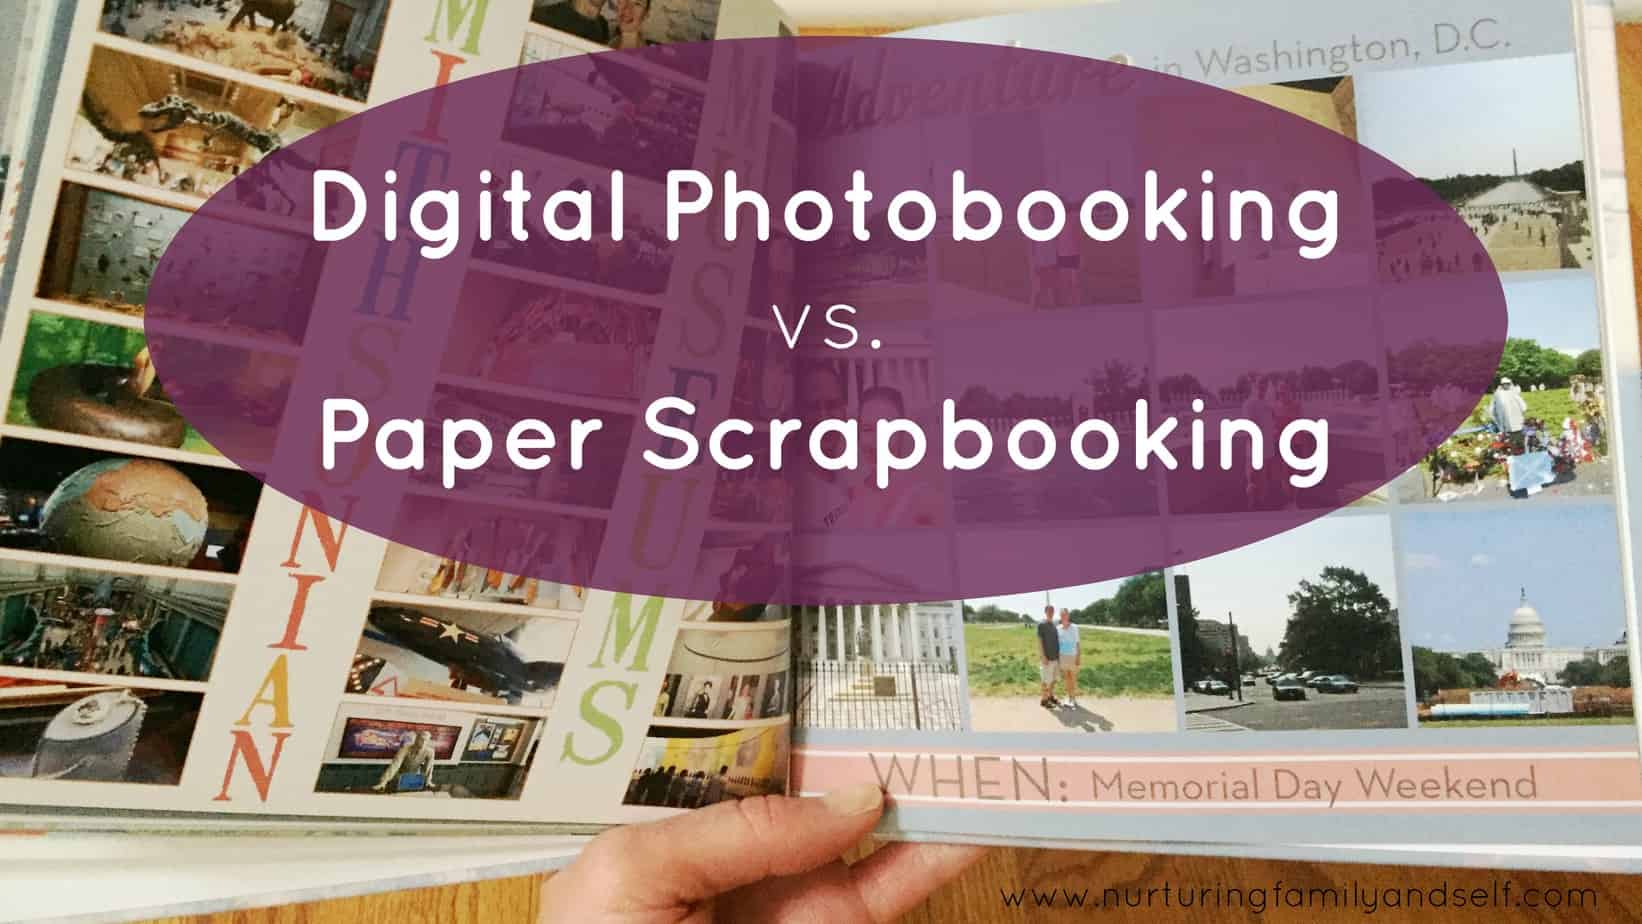 The Importance of Archival Digital Photo Papers, biscuit's space